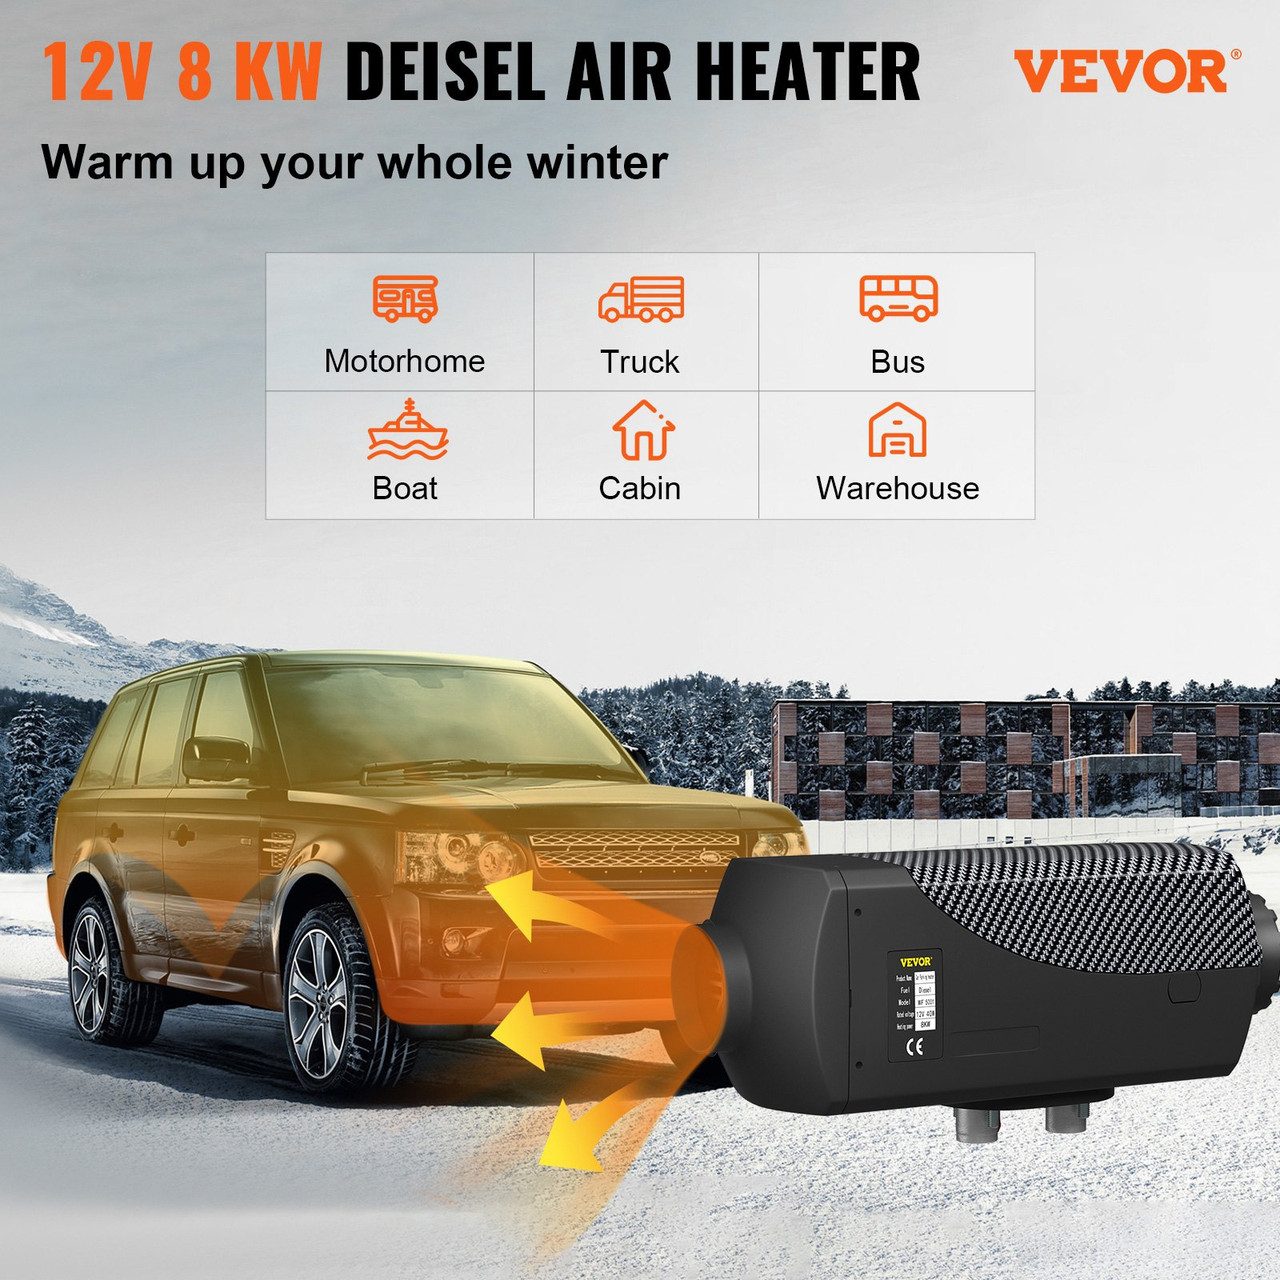 8KW Diesel Air Heater Muffler Diesel Heater 12V Remote Control Diesel Parking Heater with LCD Switch for Car Trucks Motor-home Boat and Bus